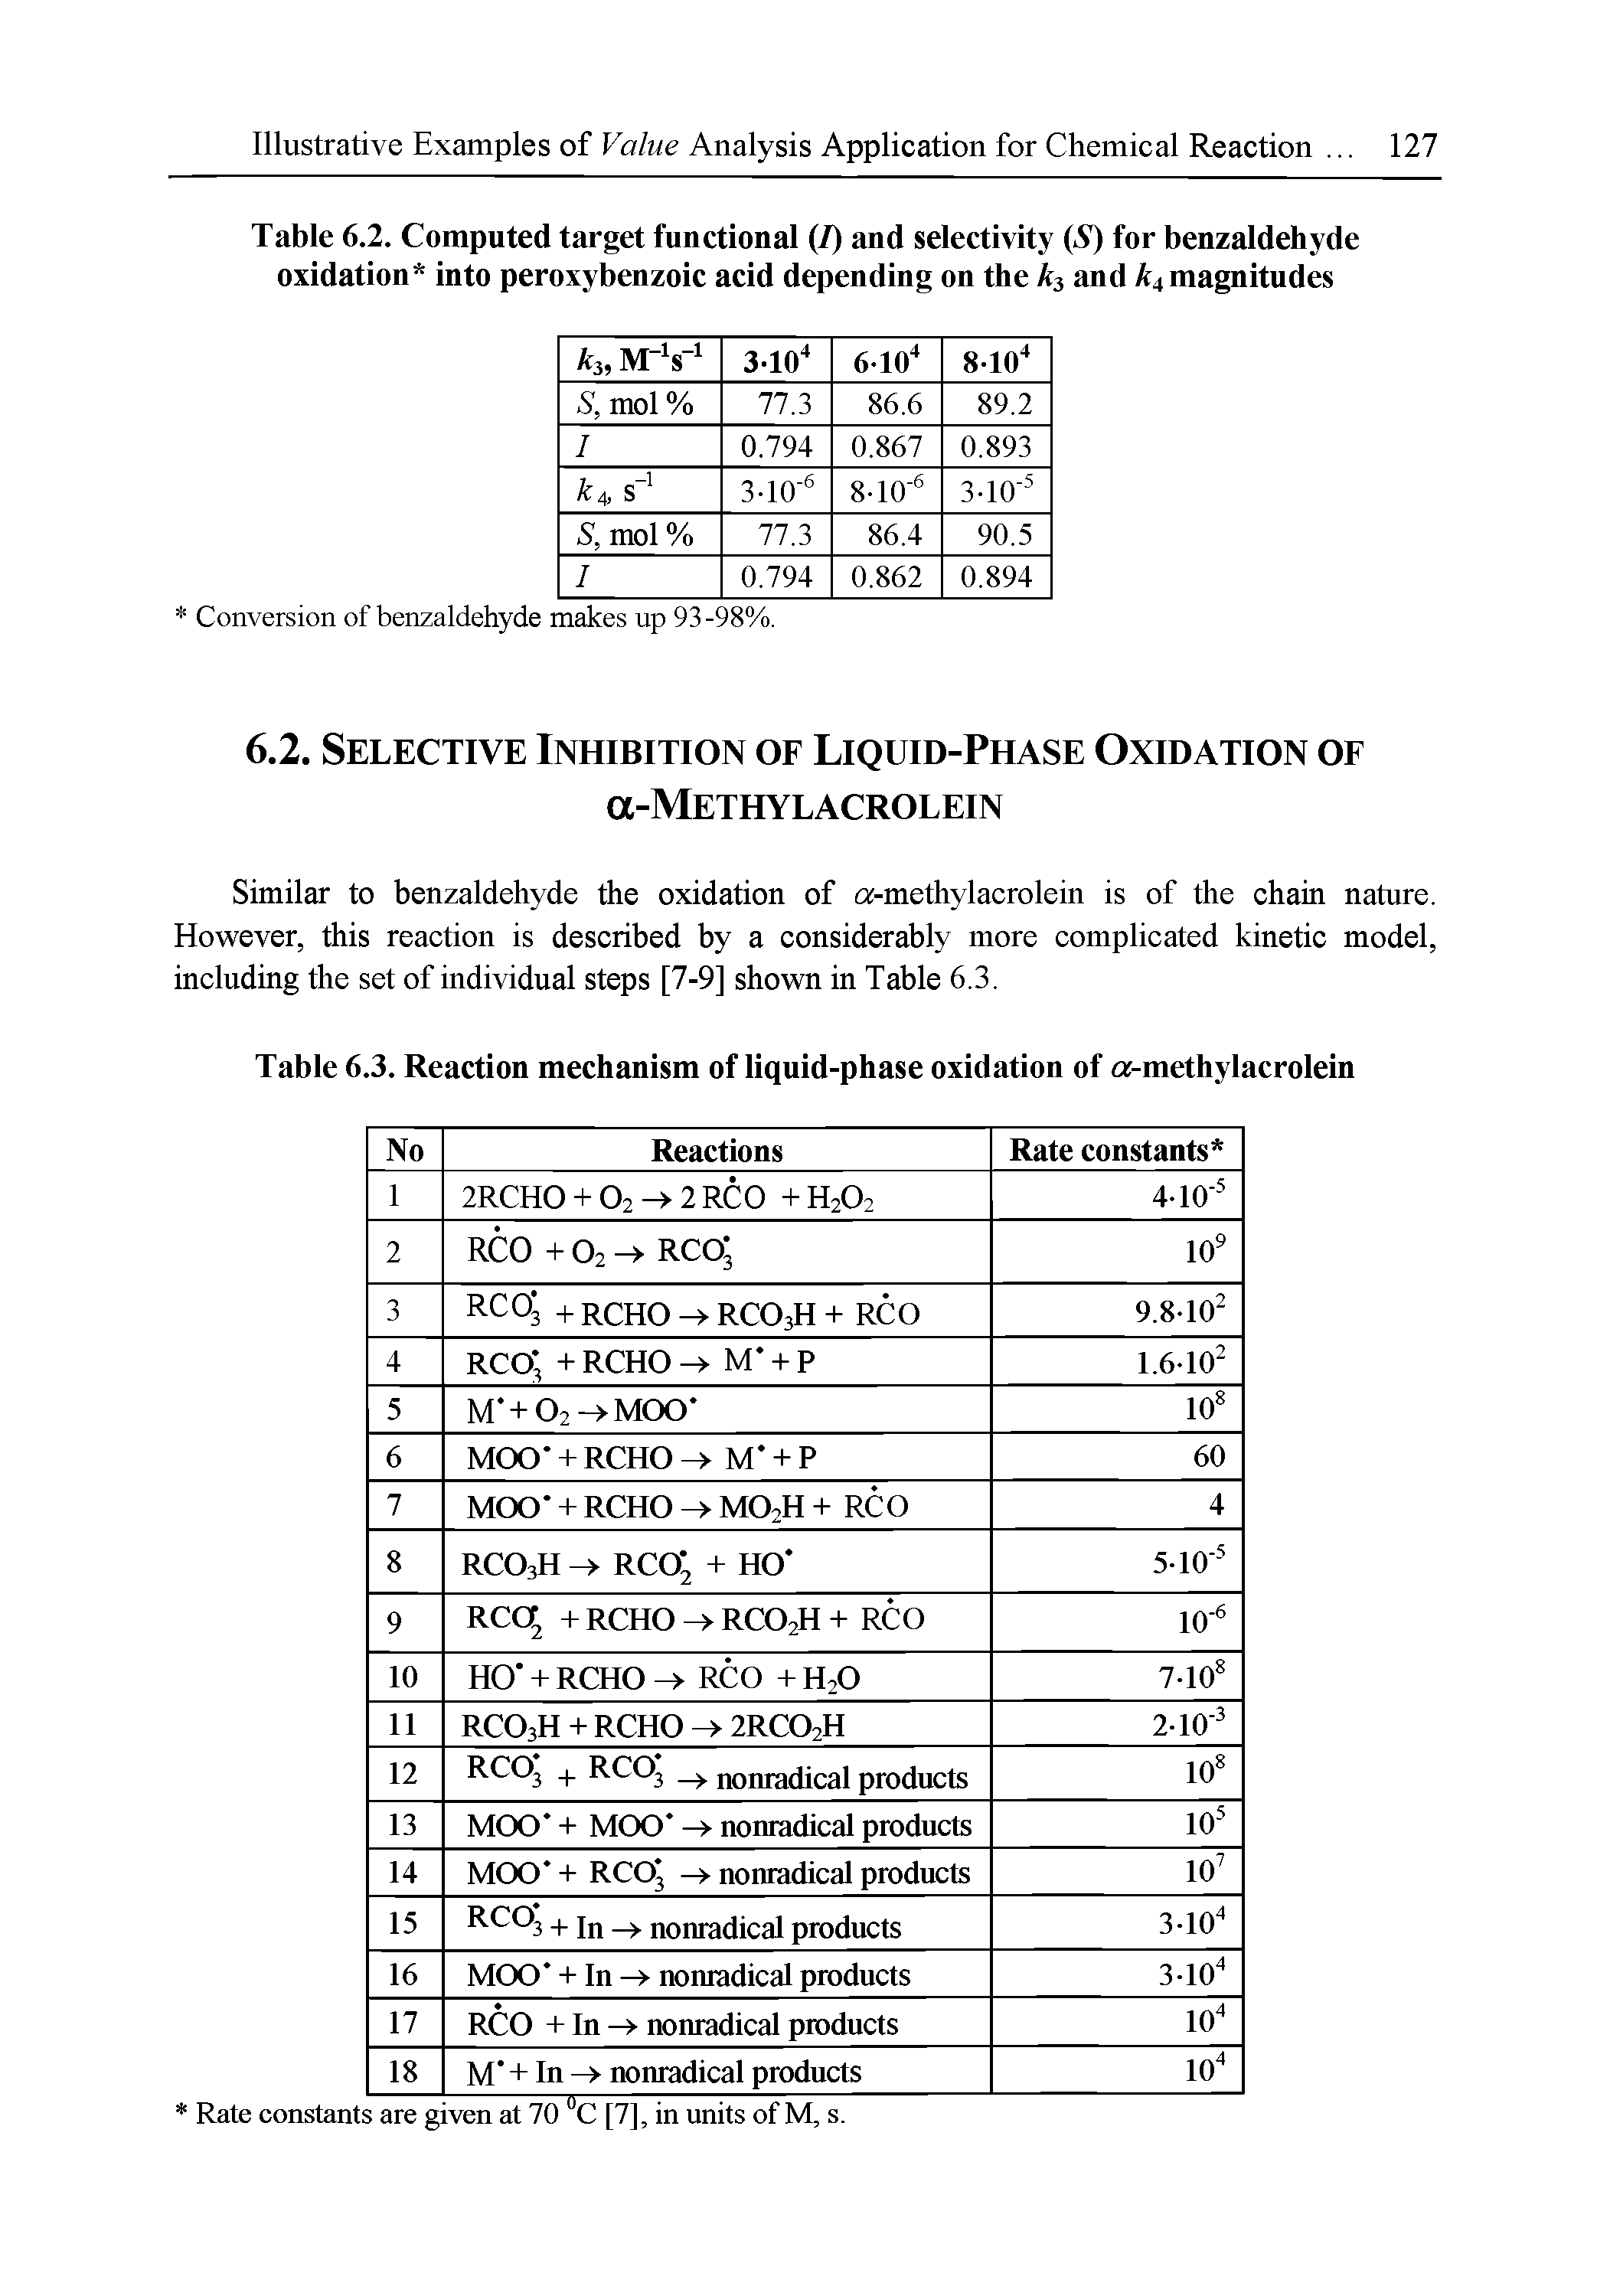 Table 6.2. Computed target functional (/) and selectivity (5) for benzaldehyde oxidation into peroxybenzoic acid depending on the and 4 magnitudes...